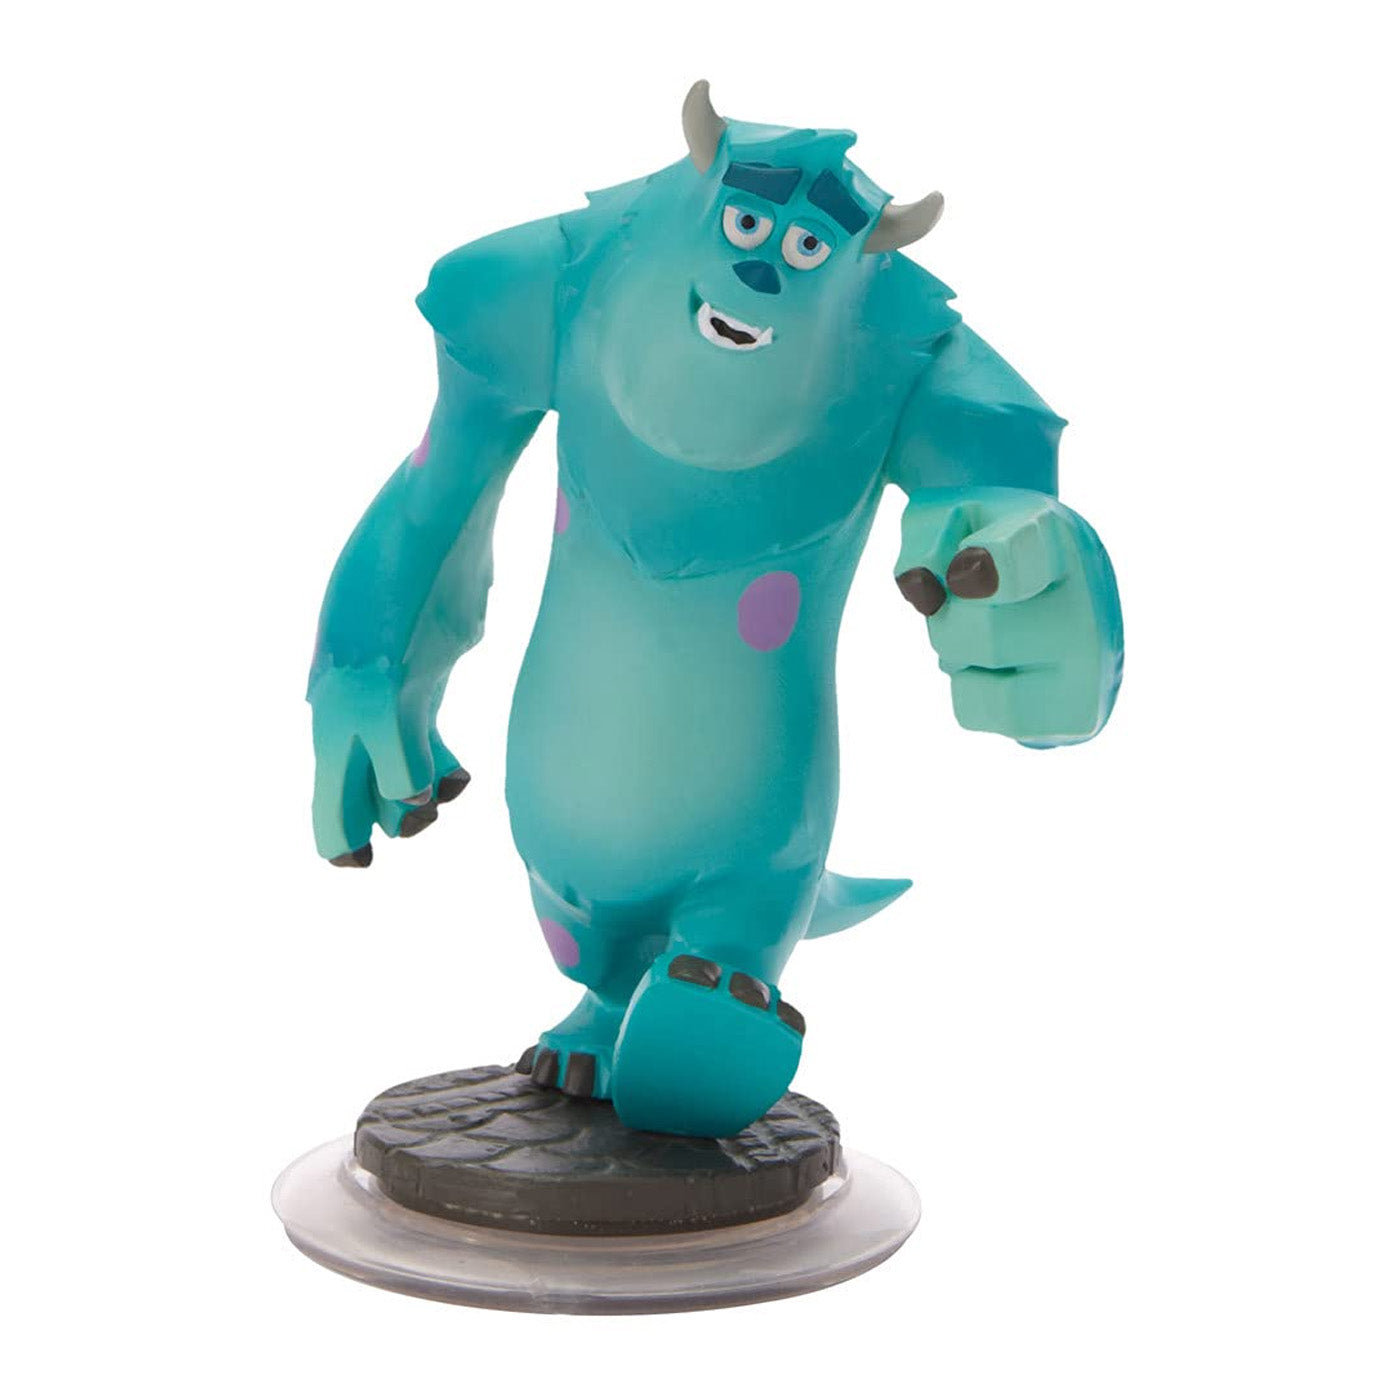 Disney Infinity 1.0 Character: Sulley